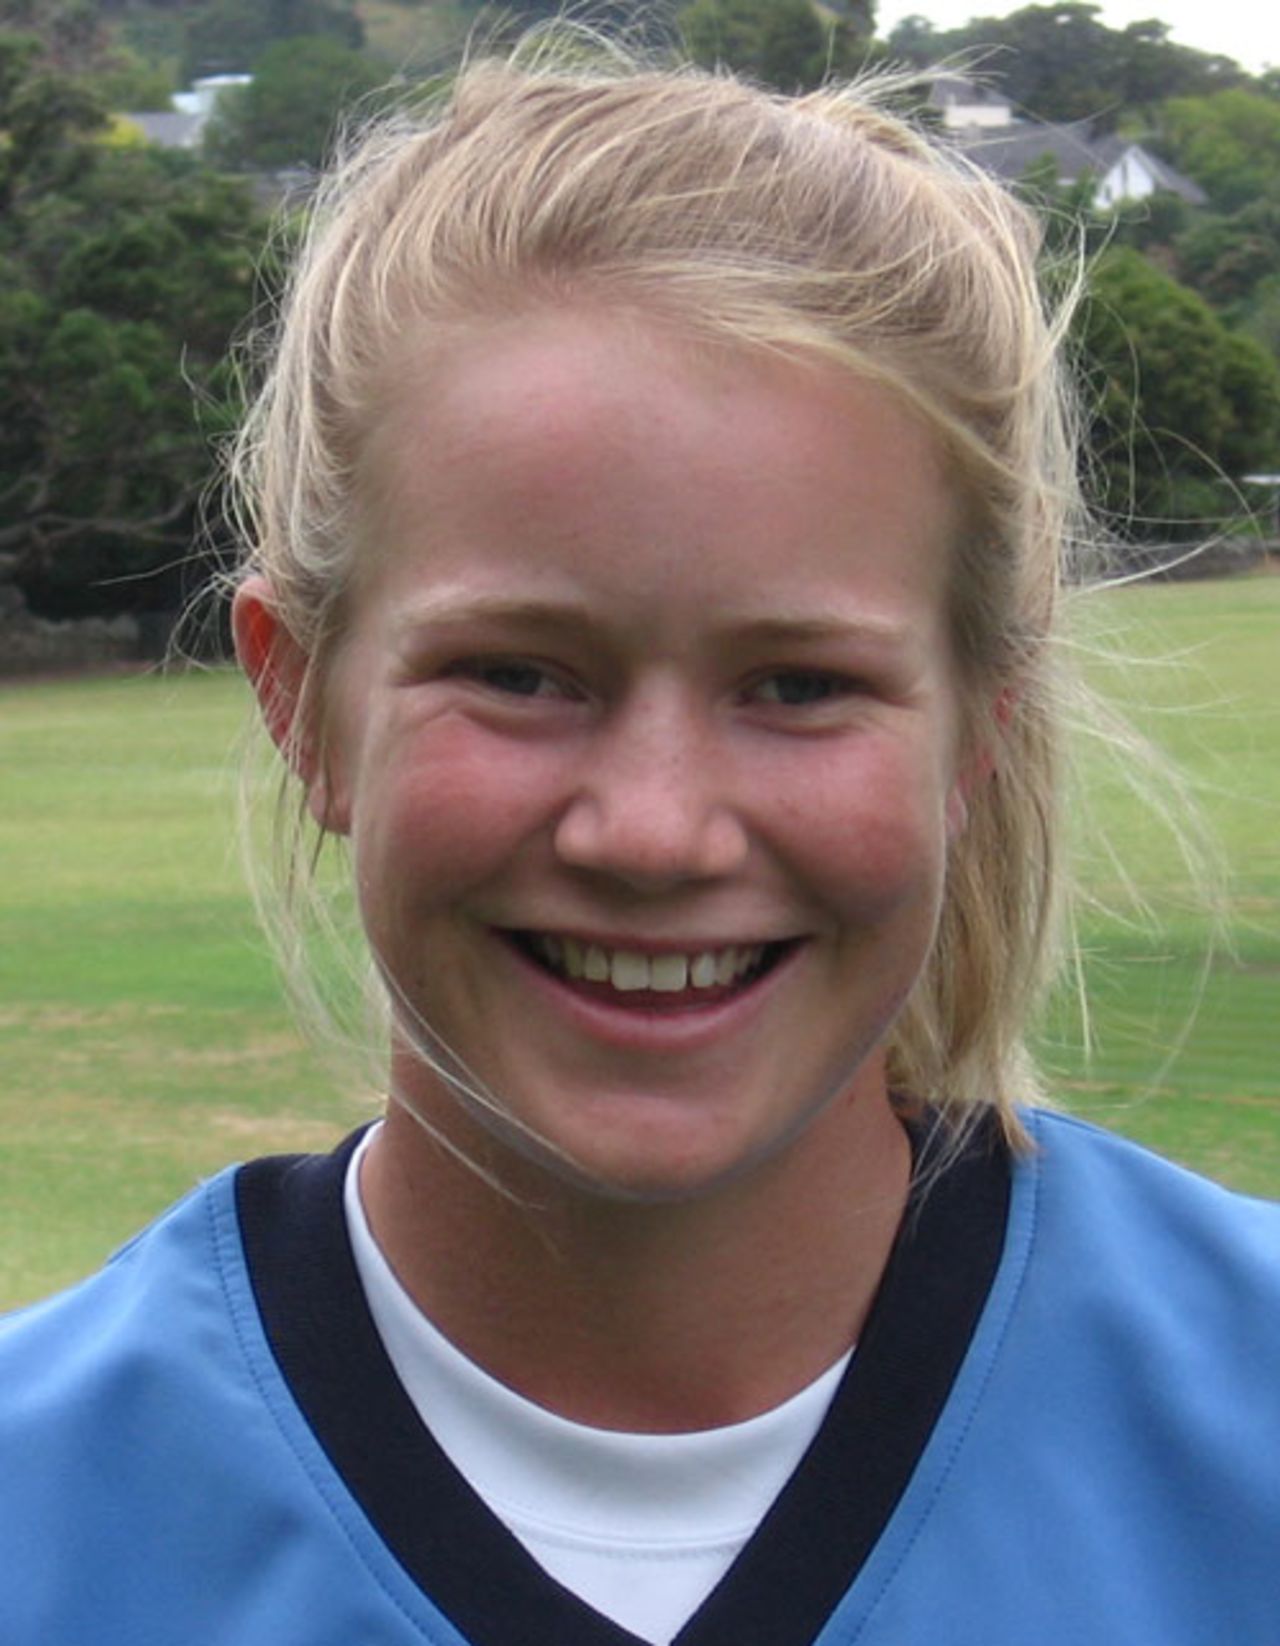 Maddy Green, player portrait